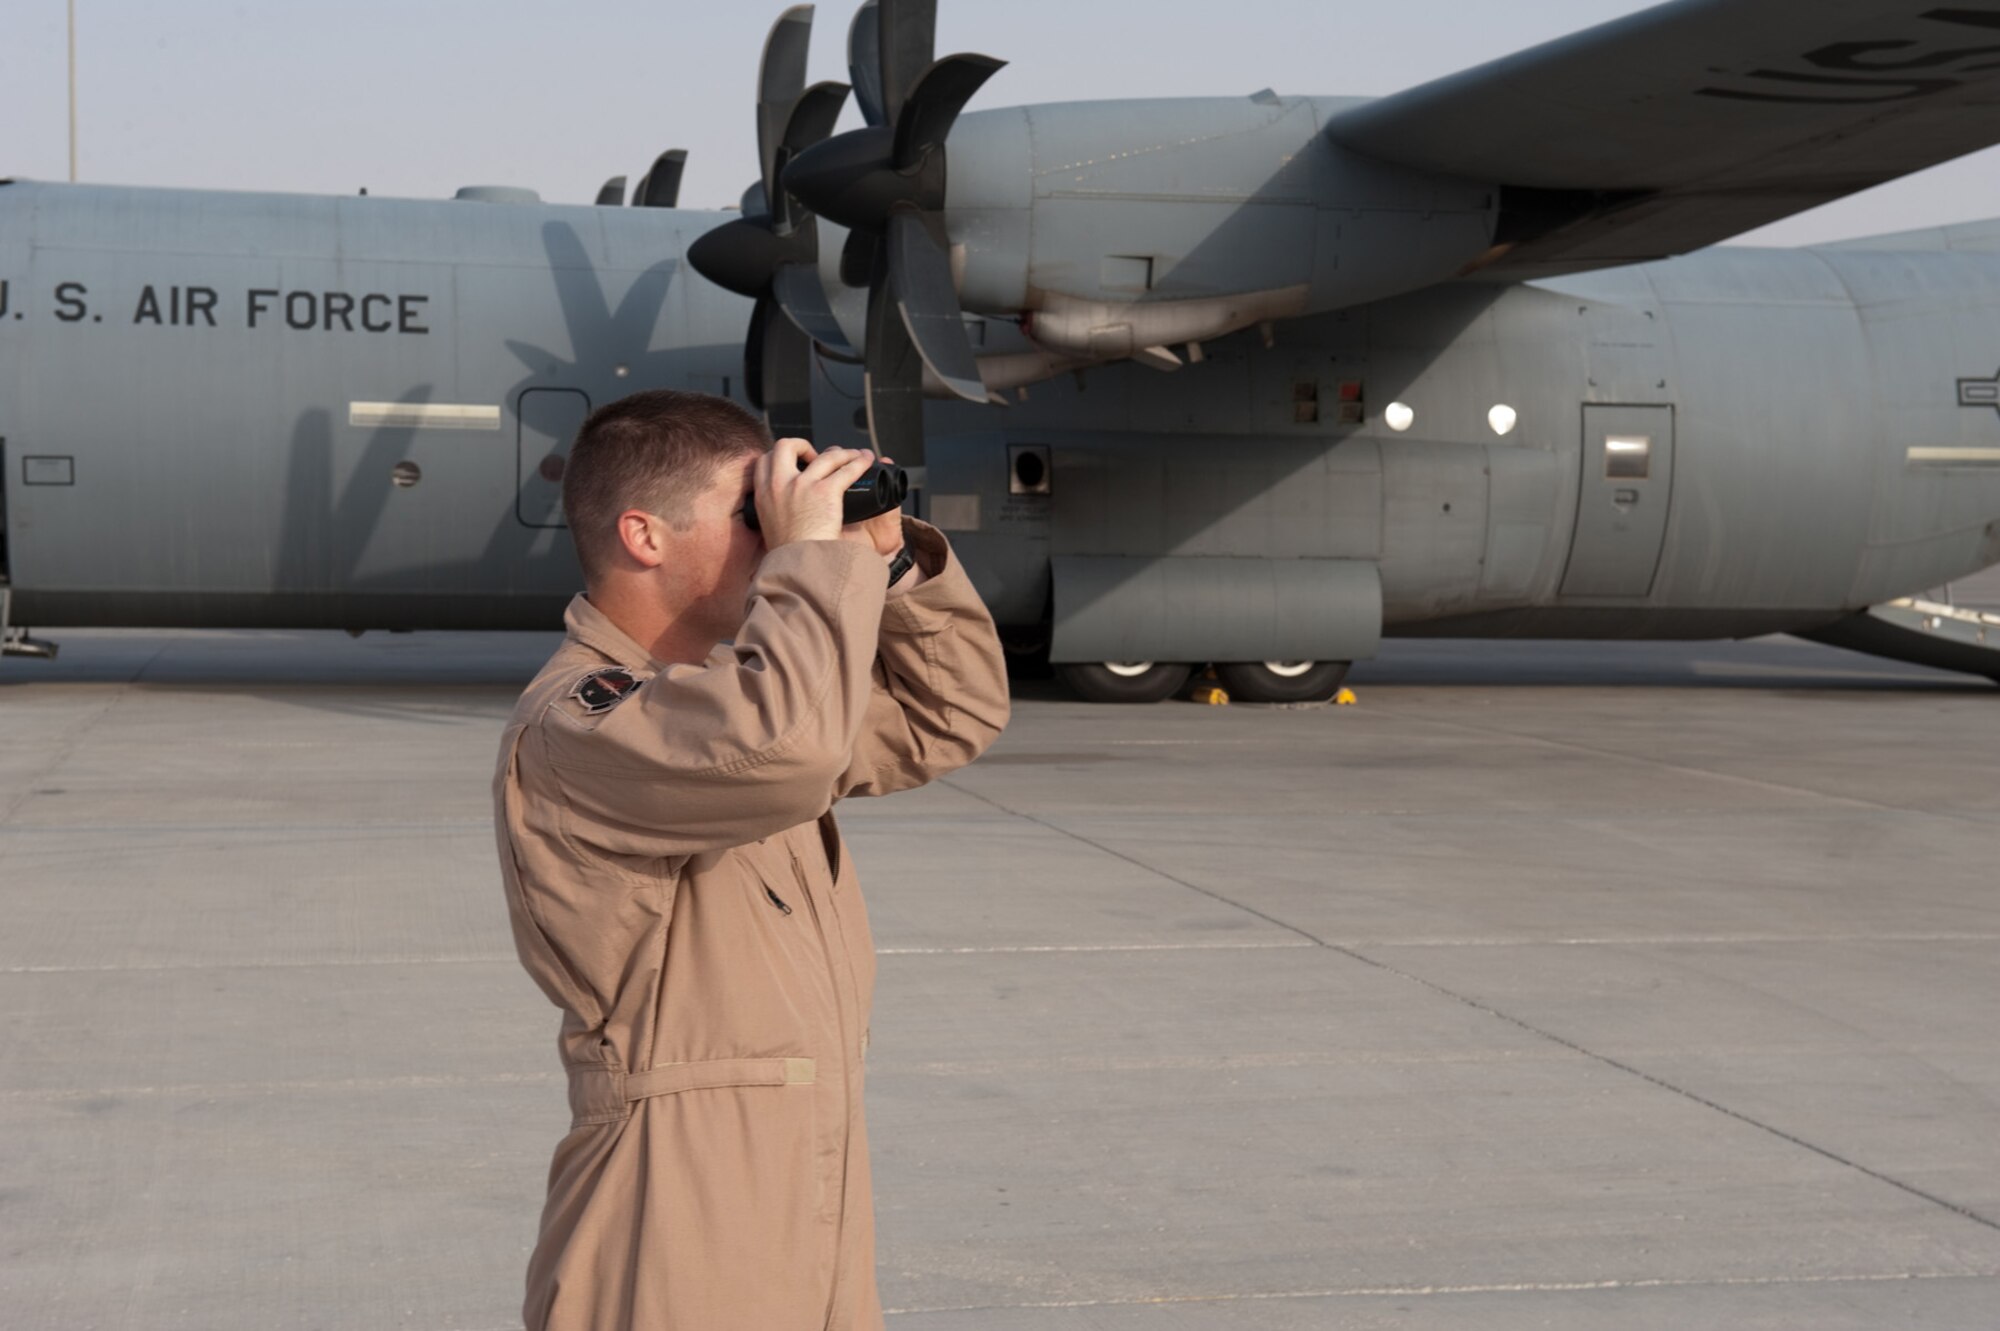 Airman 1st Class Dustin Wiley, 379th Expeditionary Security Forces Squadron Fly Away Security Team member, scans the area around a C-130 for possible security concerns, Oct. 6, in Southwest Asia. Airman Wiley, along with fellow FAST members, ensures U.S. Air Force aircraft are secure when they travel to areas with less established security. Airman Wiley is deployed from RAF Mildenhall, England, in support of Operations Iraqi and Enduring Freedom. (U.S. Air Force photo/Staff Sgt. Robert Barney)